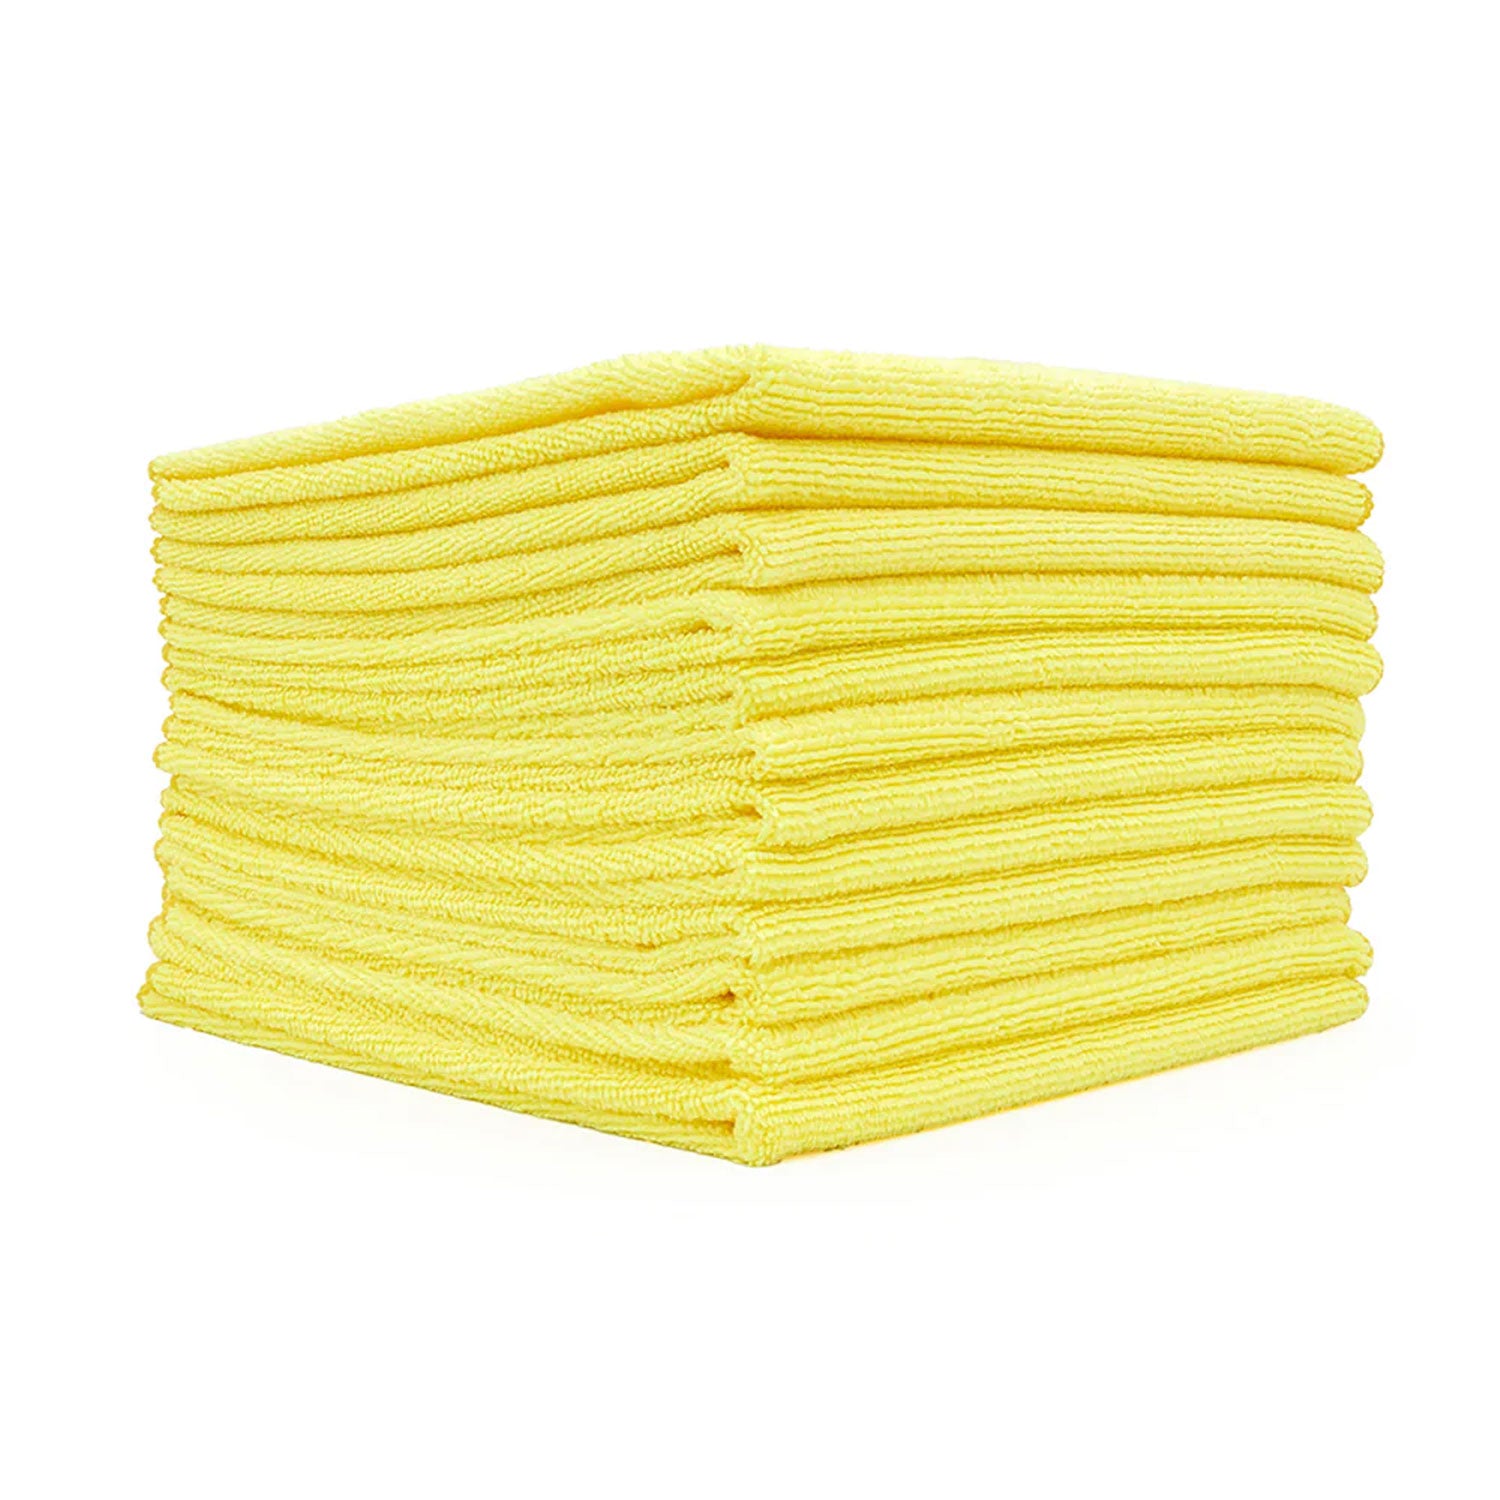 https://snsautosupply.com/cdn/shop/products/the-rag-company-stiched-edge-microfiber-terry-cleaning-towels-16-x-16-yellow-towels-sold-as-12-pack.jpg?v=1674156986&width=1500